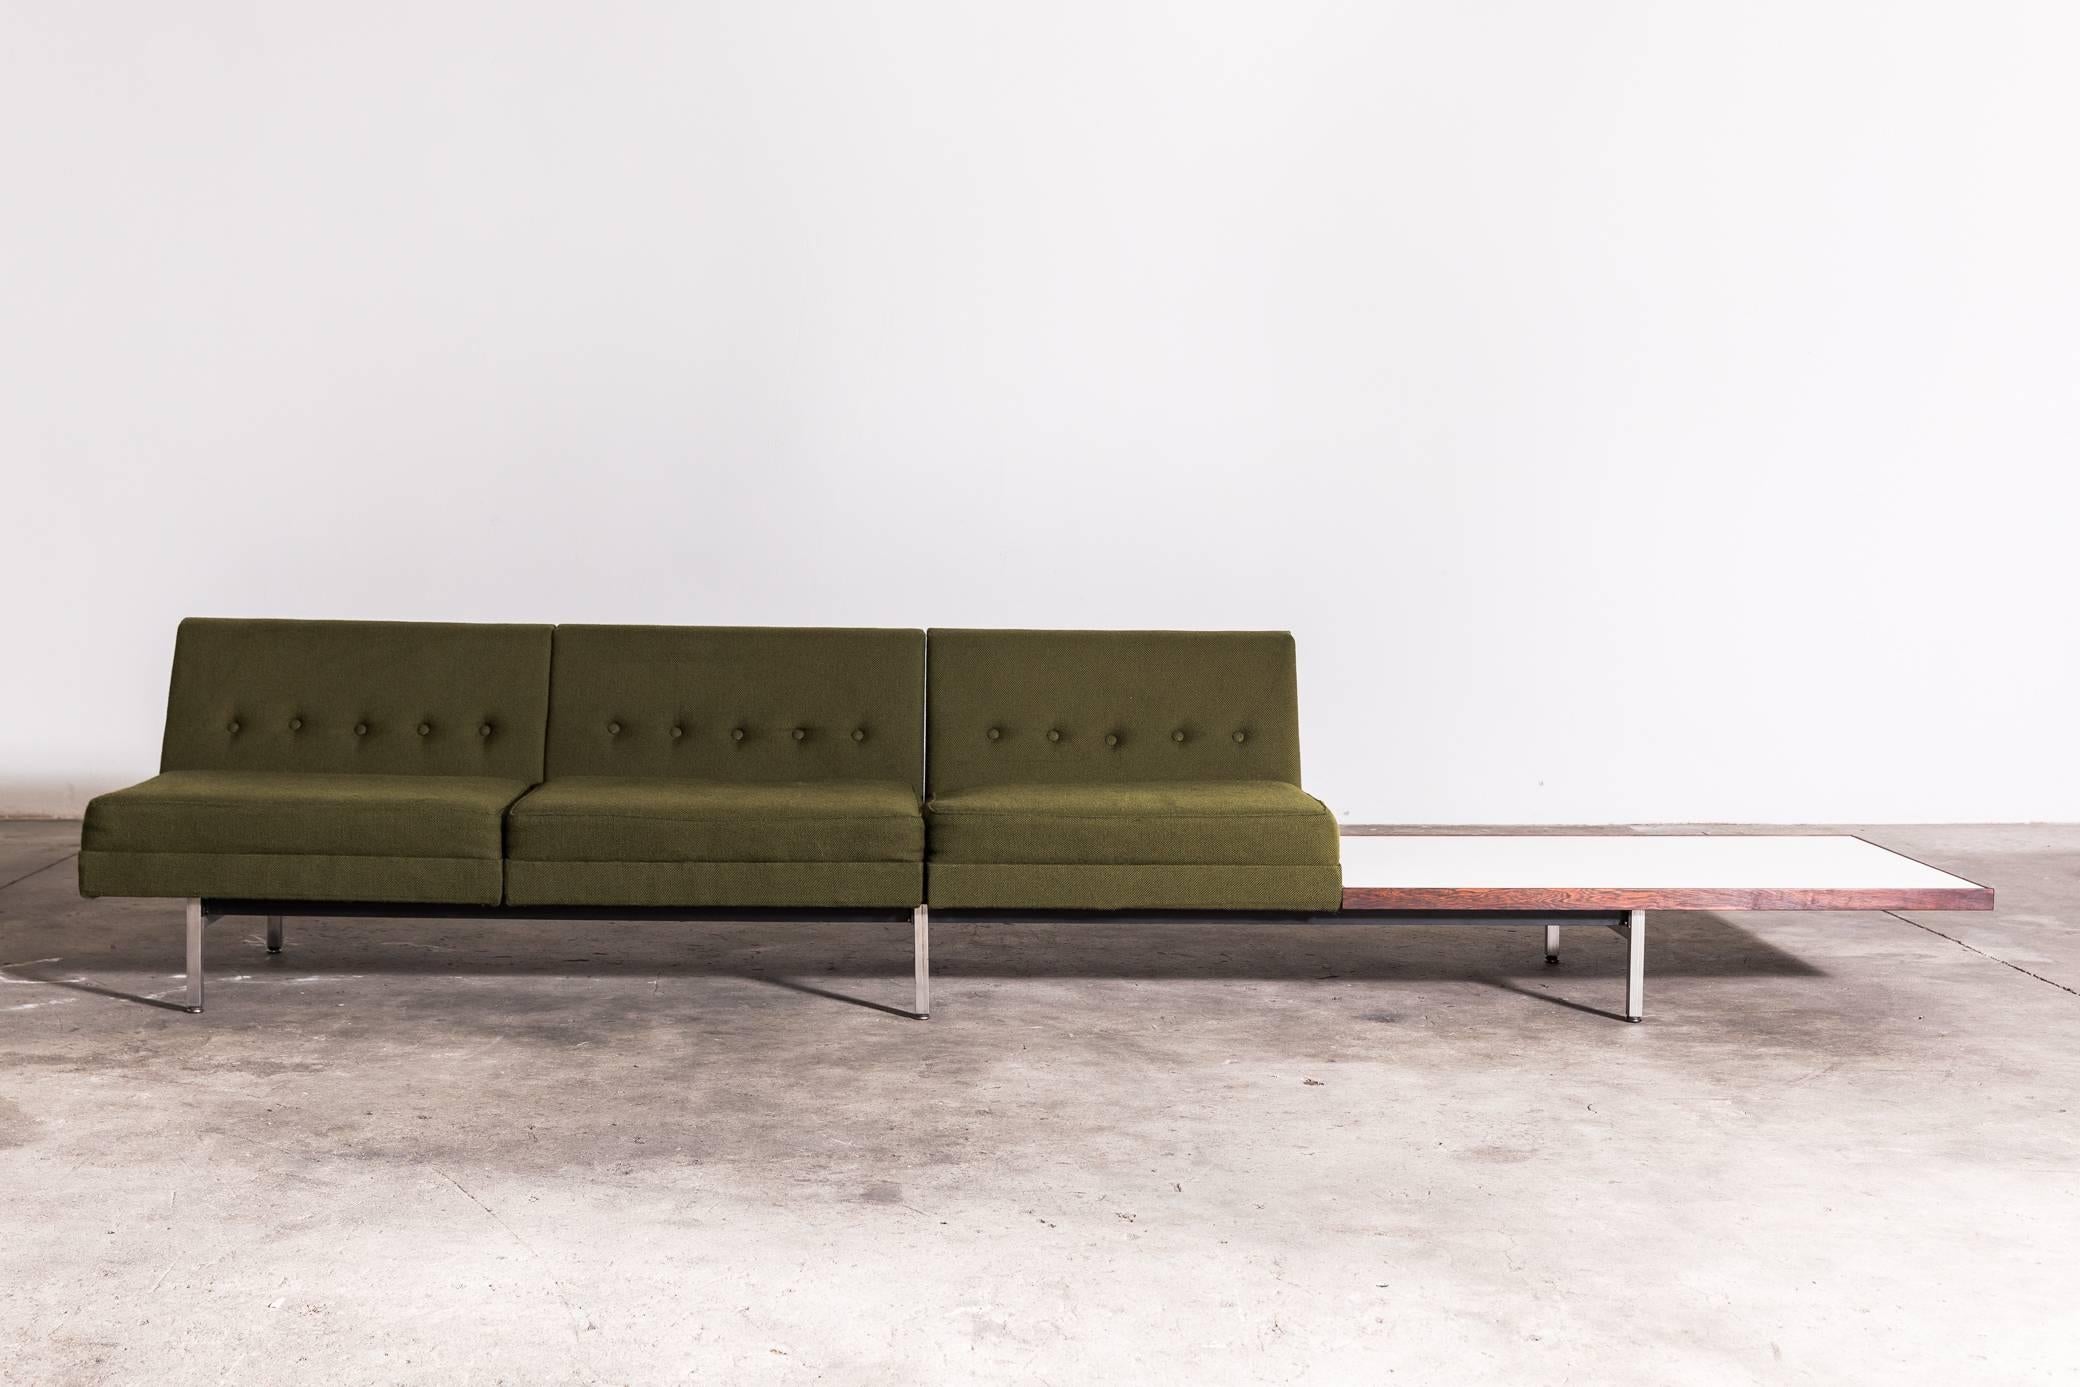 American Modular Sofa Set by George Nelson for Herman Miller, 1968